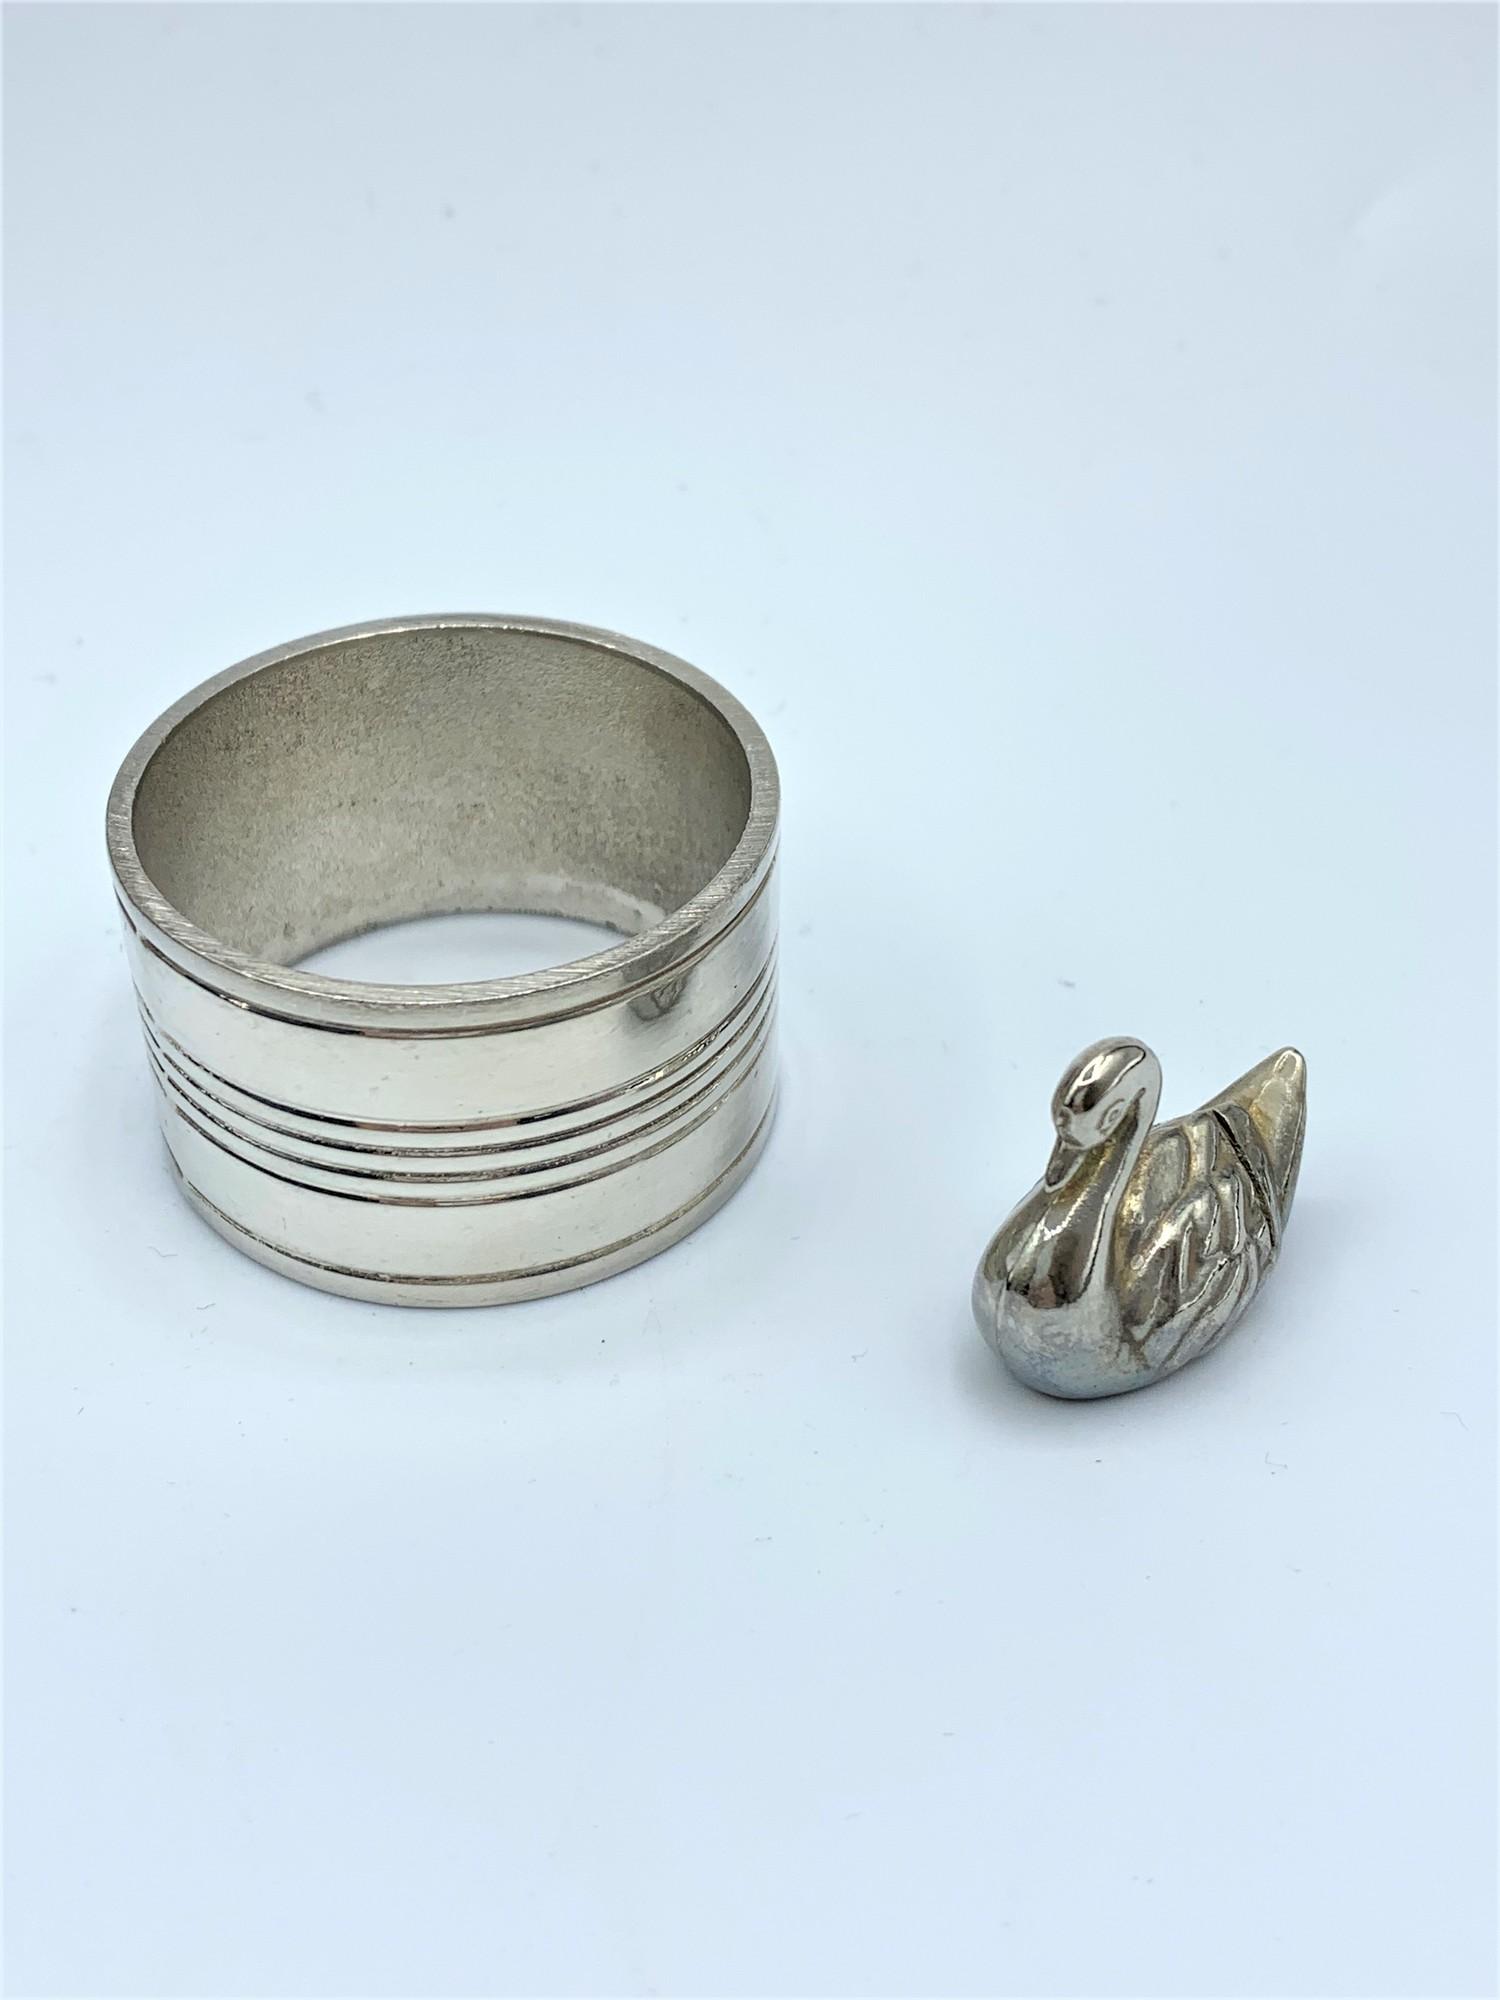 Boxed set of 6 serviette rings, with place setting swans & cards. - Image 3 of 5